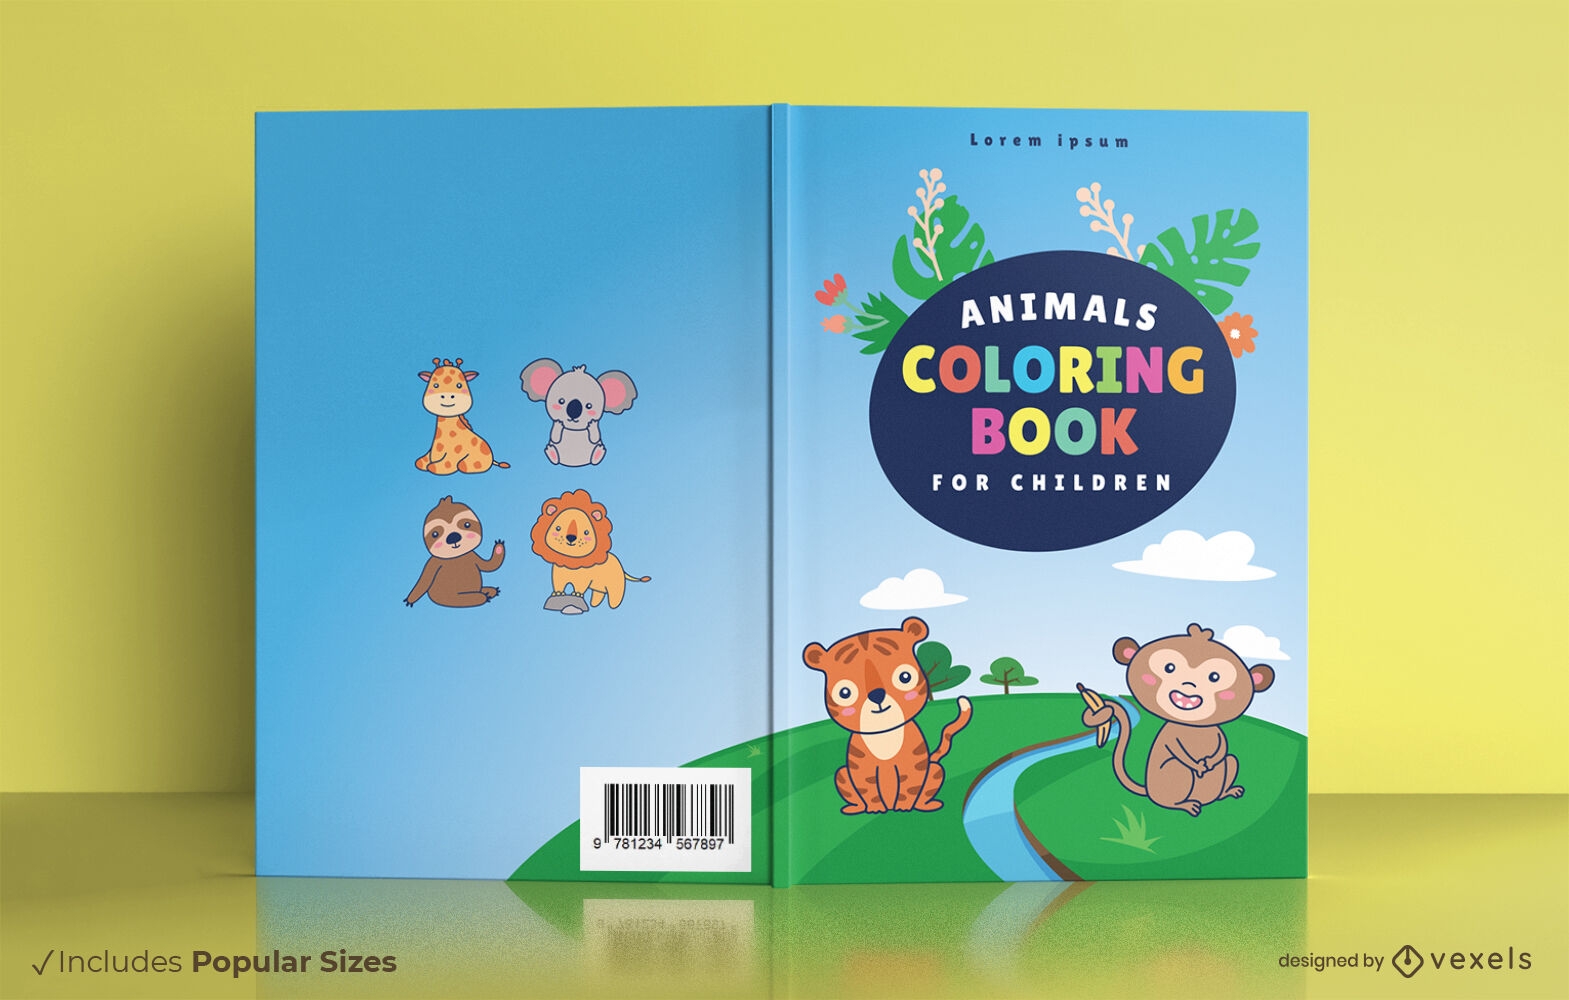 Animals Coloring Book Cover Design for Children